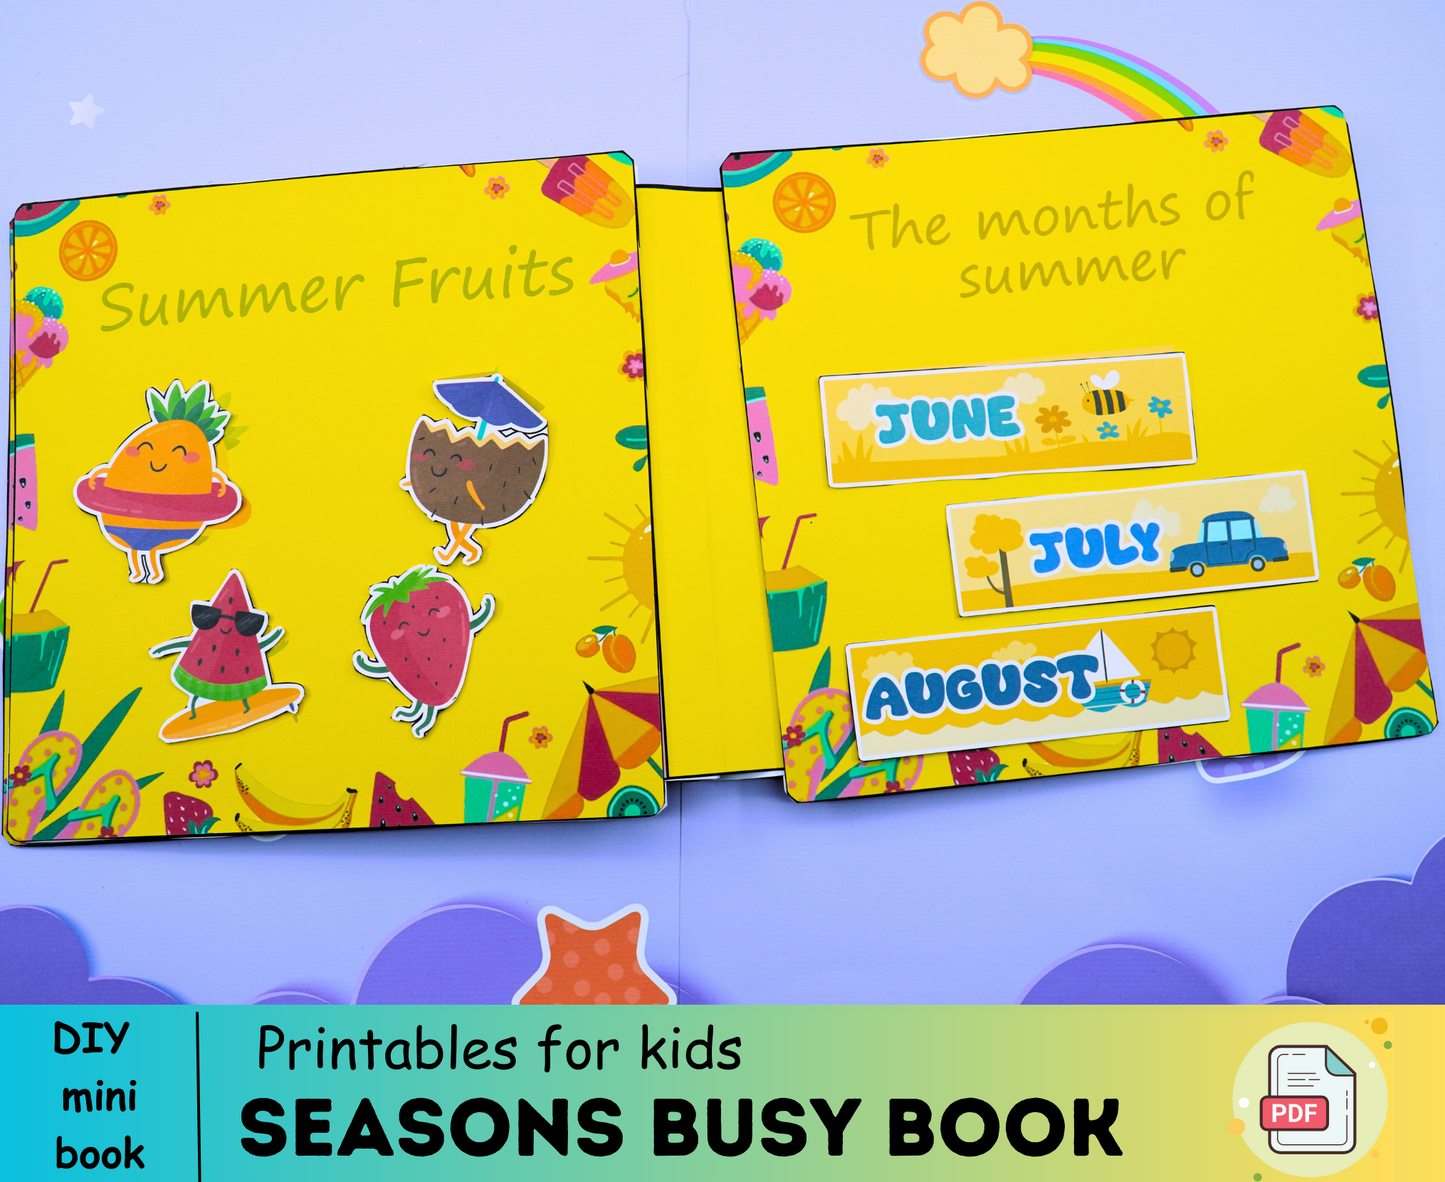 Summer Busy Book Printable 🌈 Homeschool Busy Book For Kids, Seasons Quiet Book For Preschool | DIY kit for your little one🌈 Woa Doll Crafts